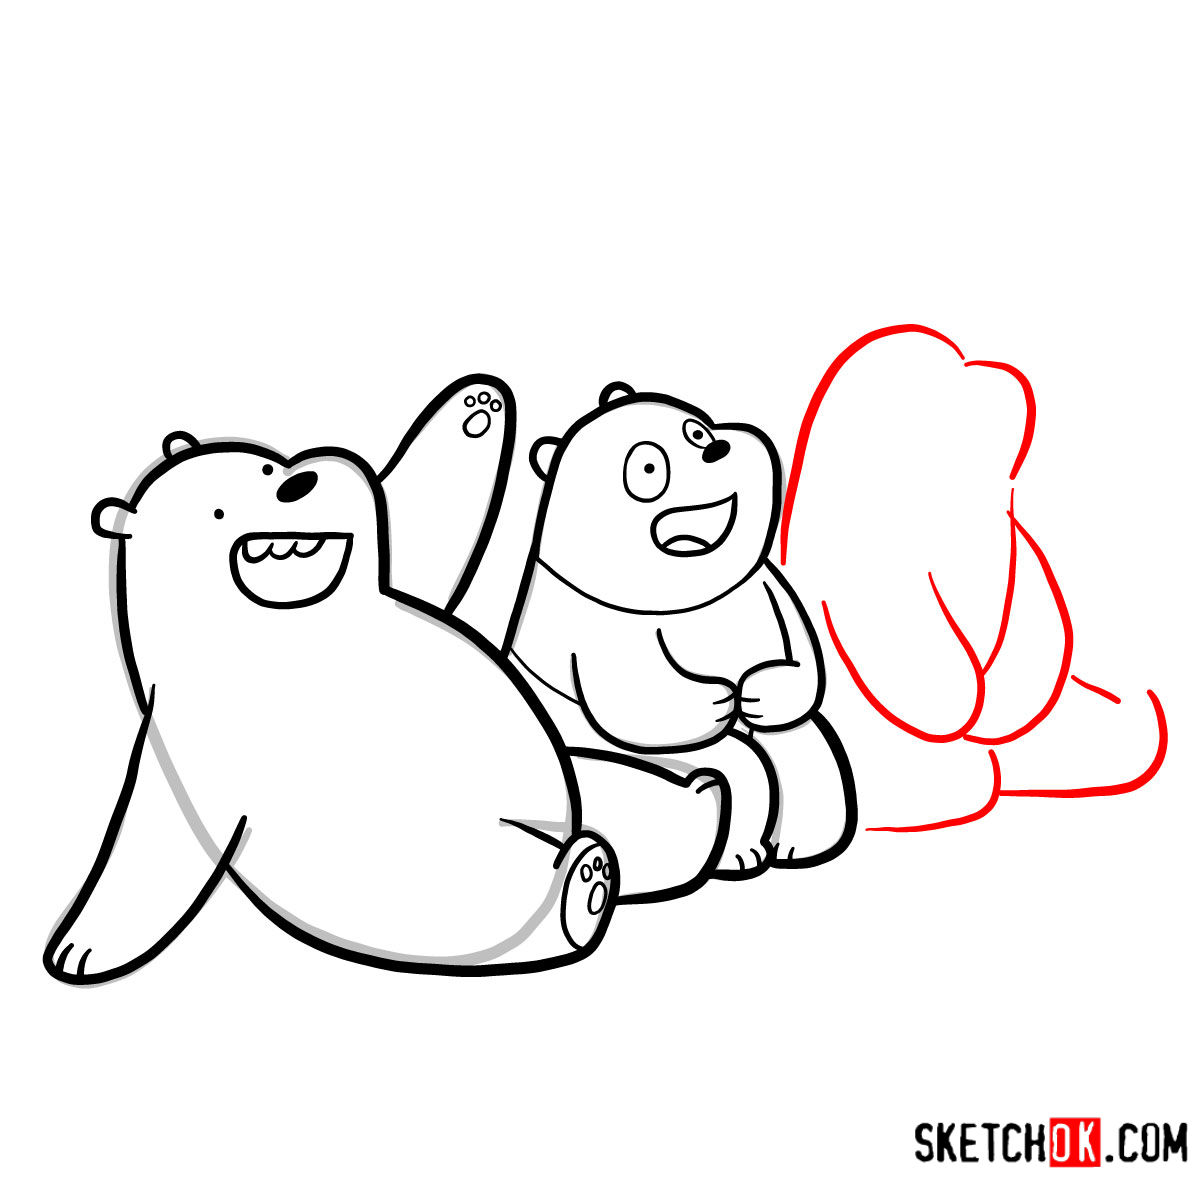 How to draw all three bears together | We Bare Bears - step 15